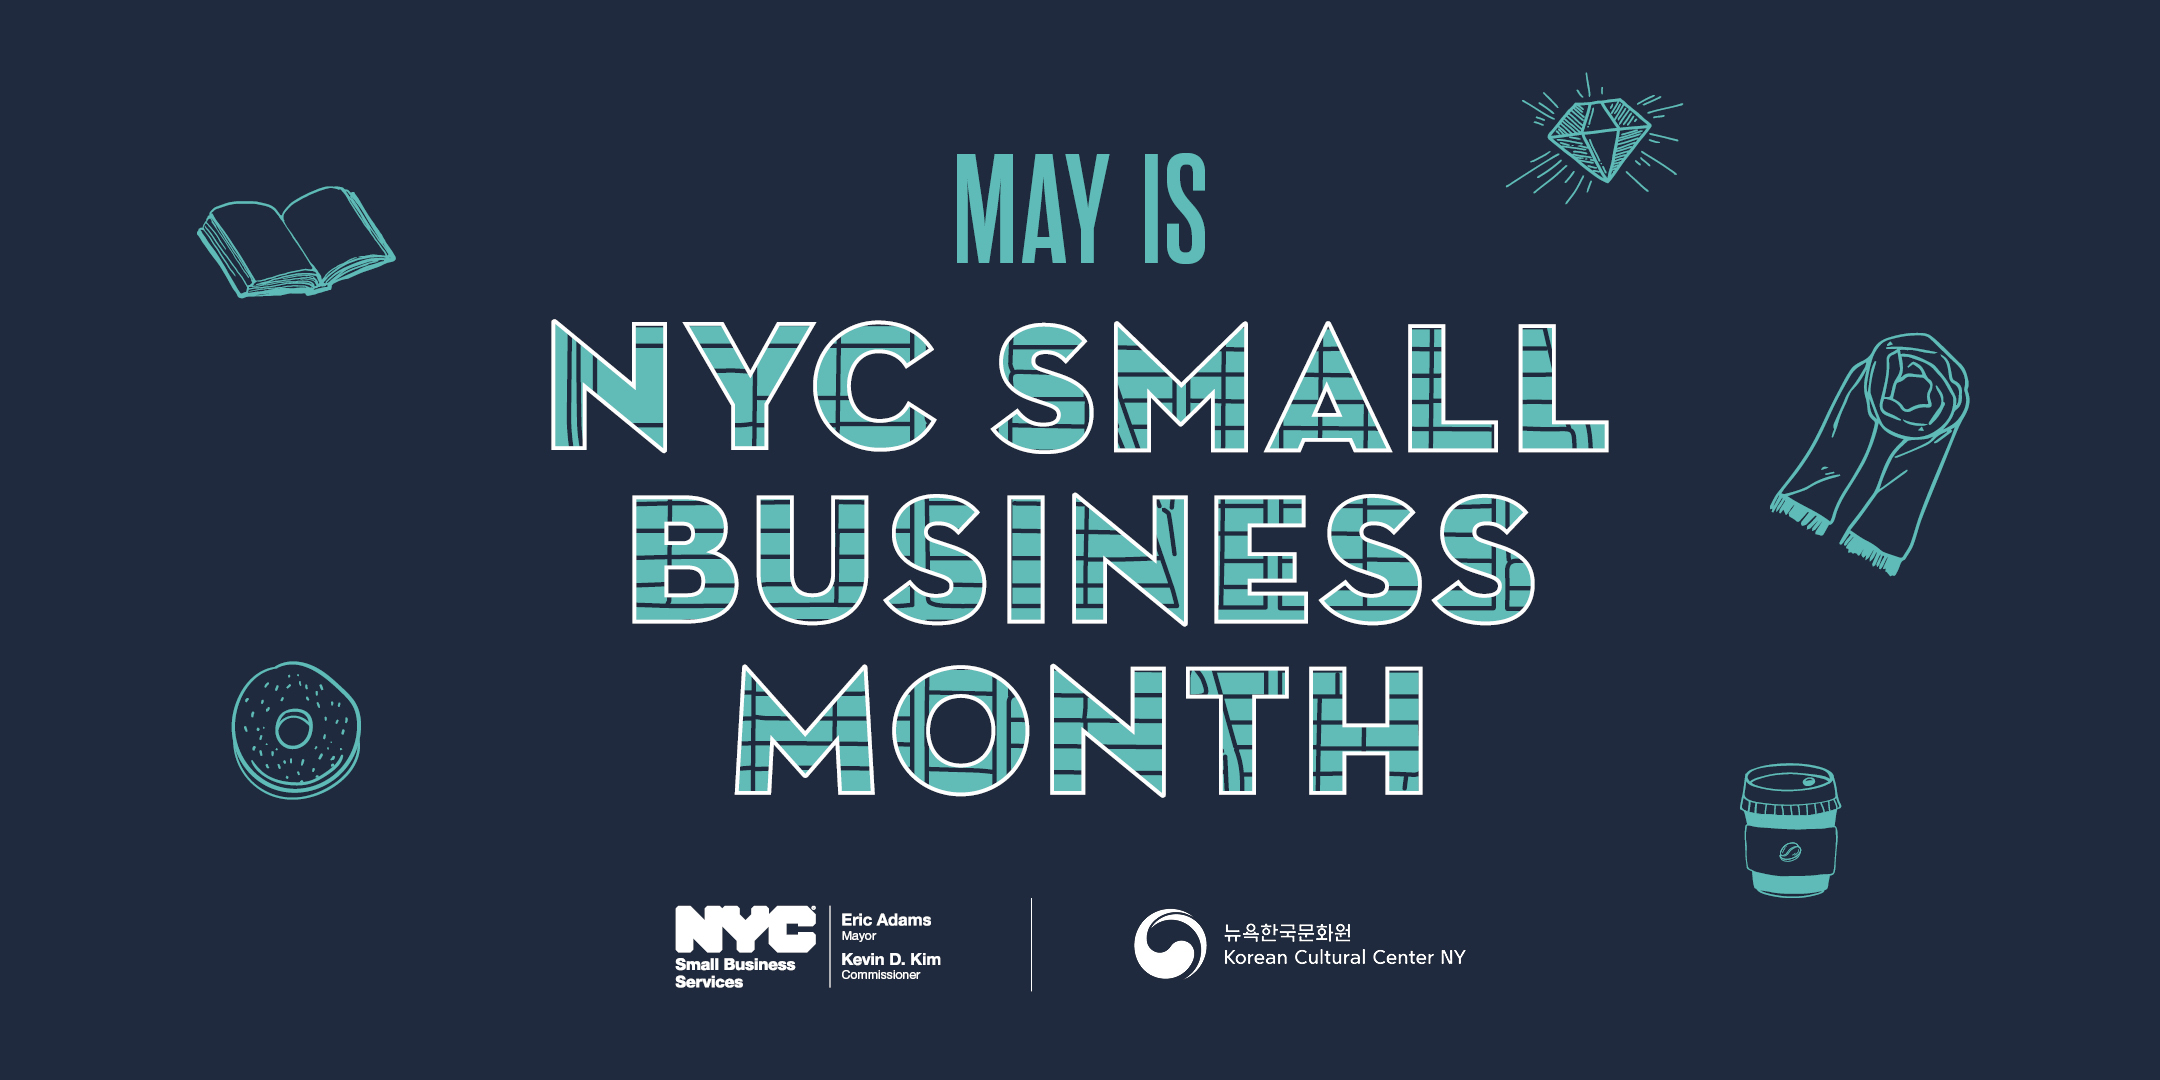 Promotional graphic with icons of items to purchase, SBS and Korean Cultural Center of New York logos, and text "May is NYC Small Business Month"